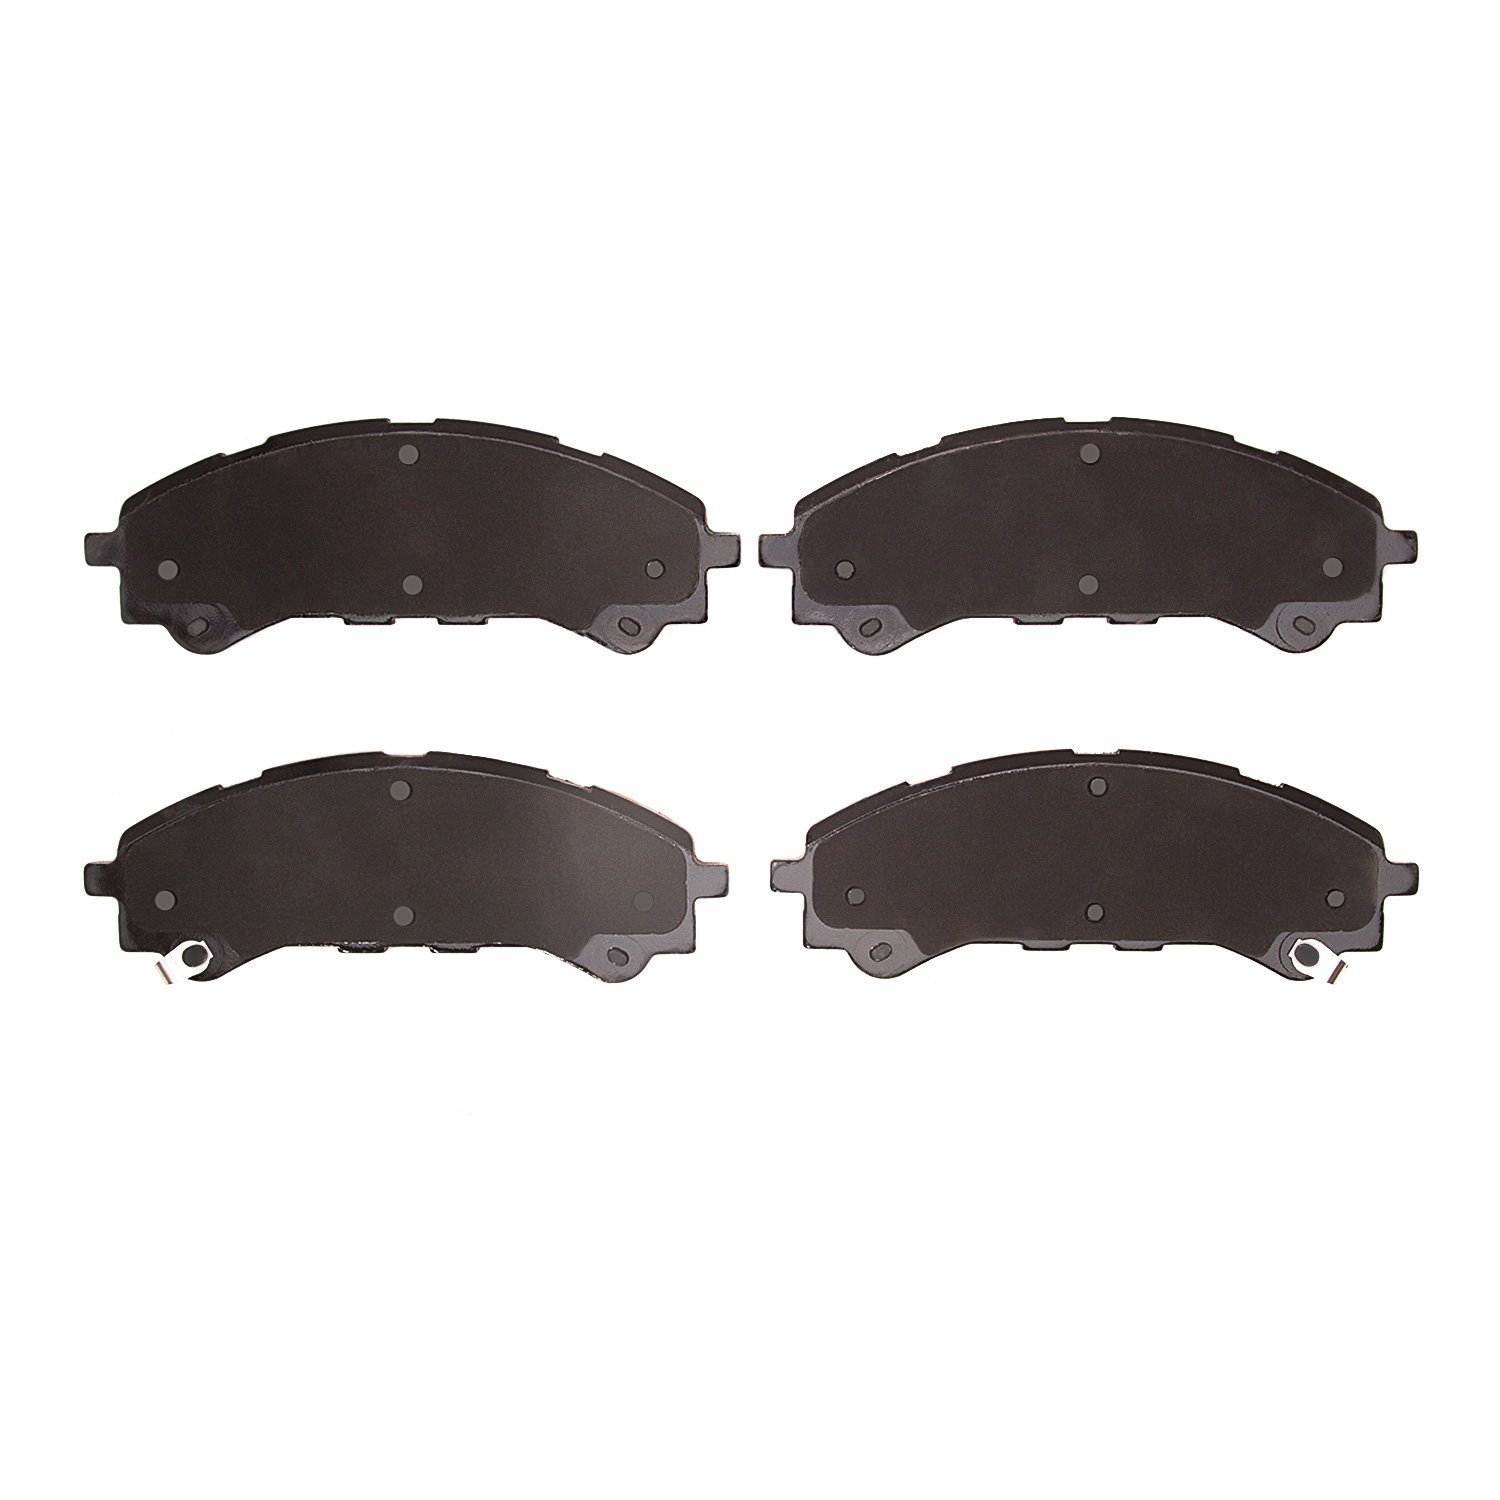 1400-2216-00 Ultimate-Duty Brake Pads Kit, Fits Select Ford/Lincoln/Mercury/Mazda, Position: Front